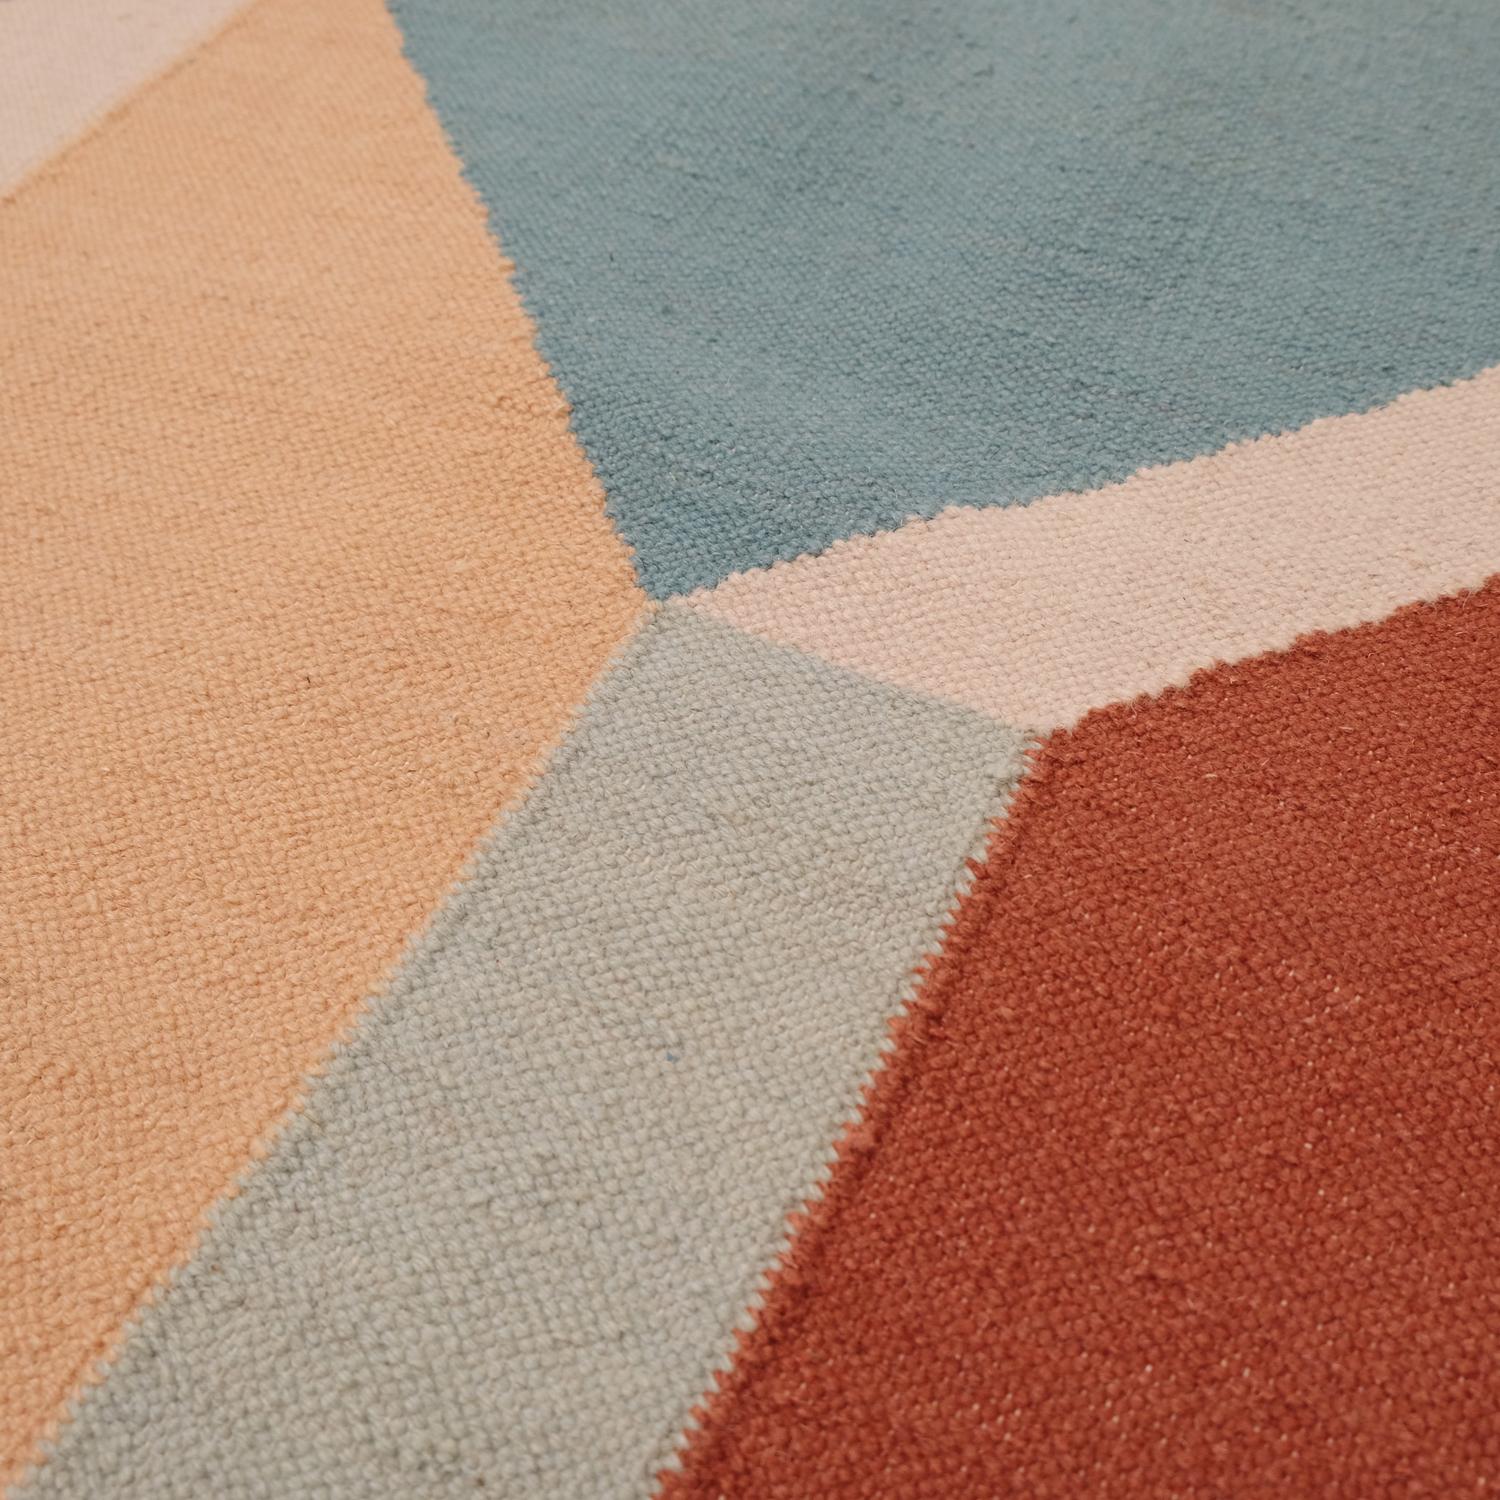 Afternoon Dream - Design Rug Ouwen Mori Kilim Carpet Wool Cotton Handwoven Warm
Afternoon Dream

On this carpet geometry is recomposed into an irregular perspective of architectural forms. The colour gives these forms a sense of time rhythm to